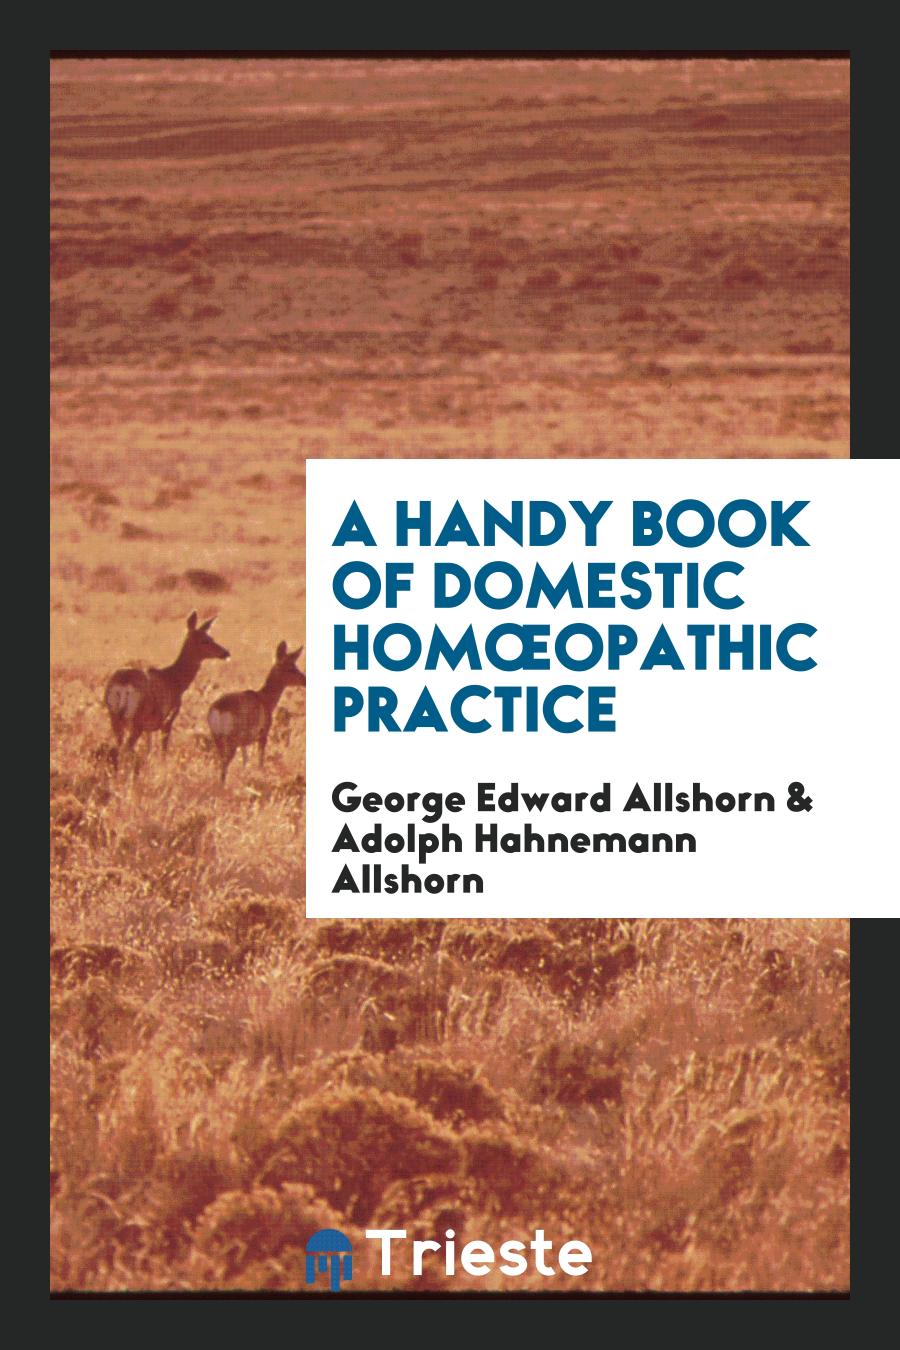 A Handy Book of Domestic Homœopathic Practice